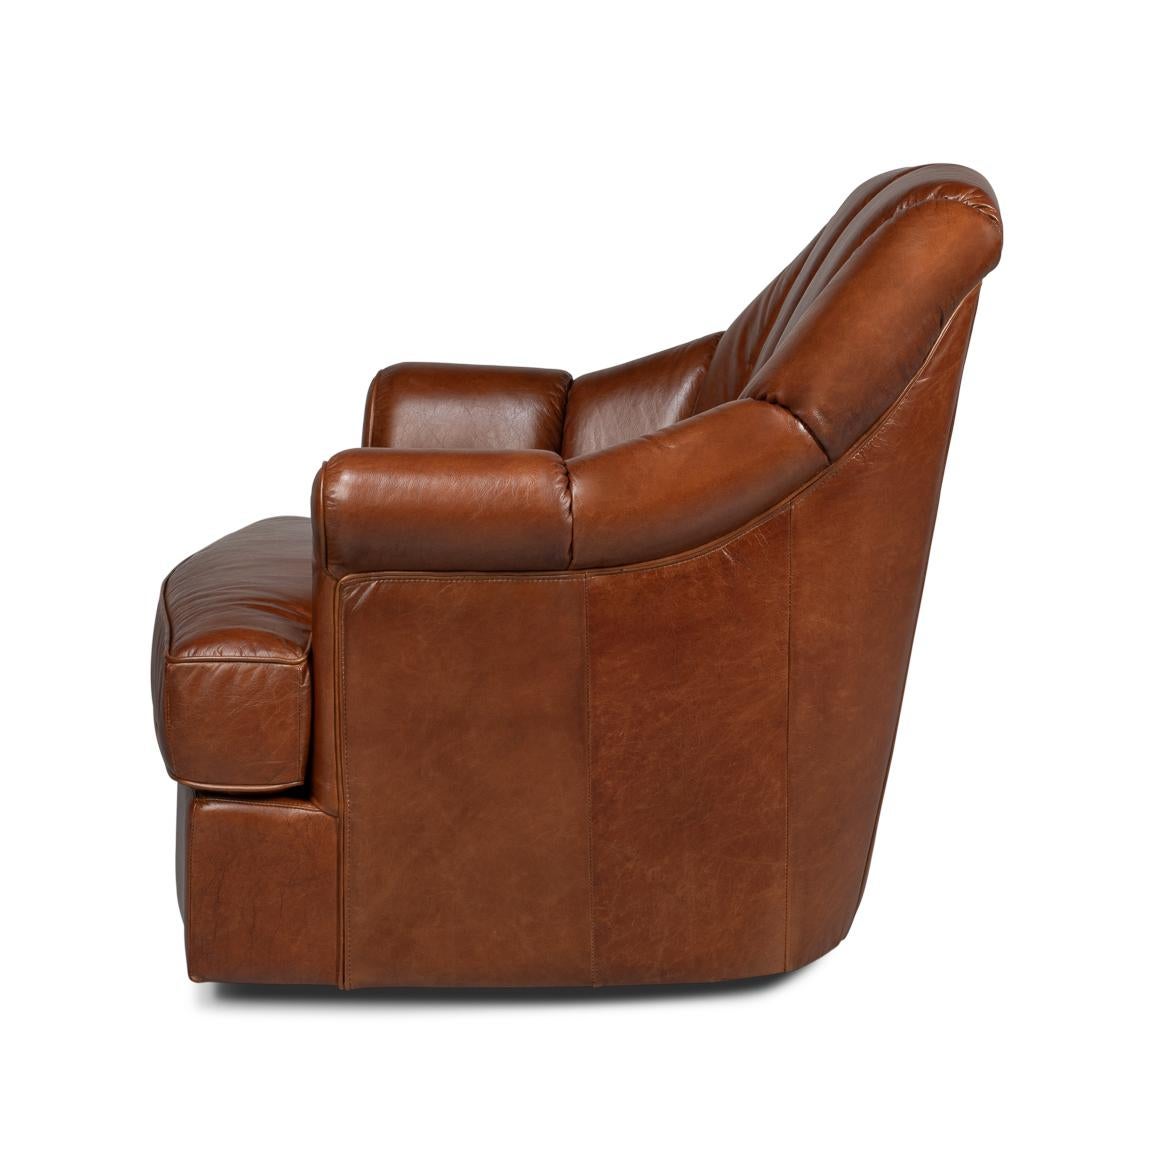 American Classical Havana Brown Leather Swivel Chair For Sale